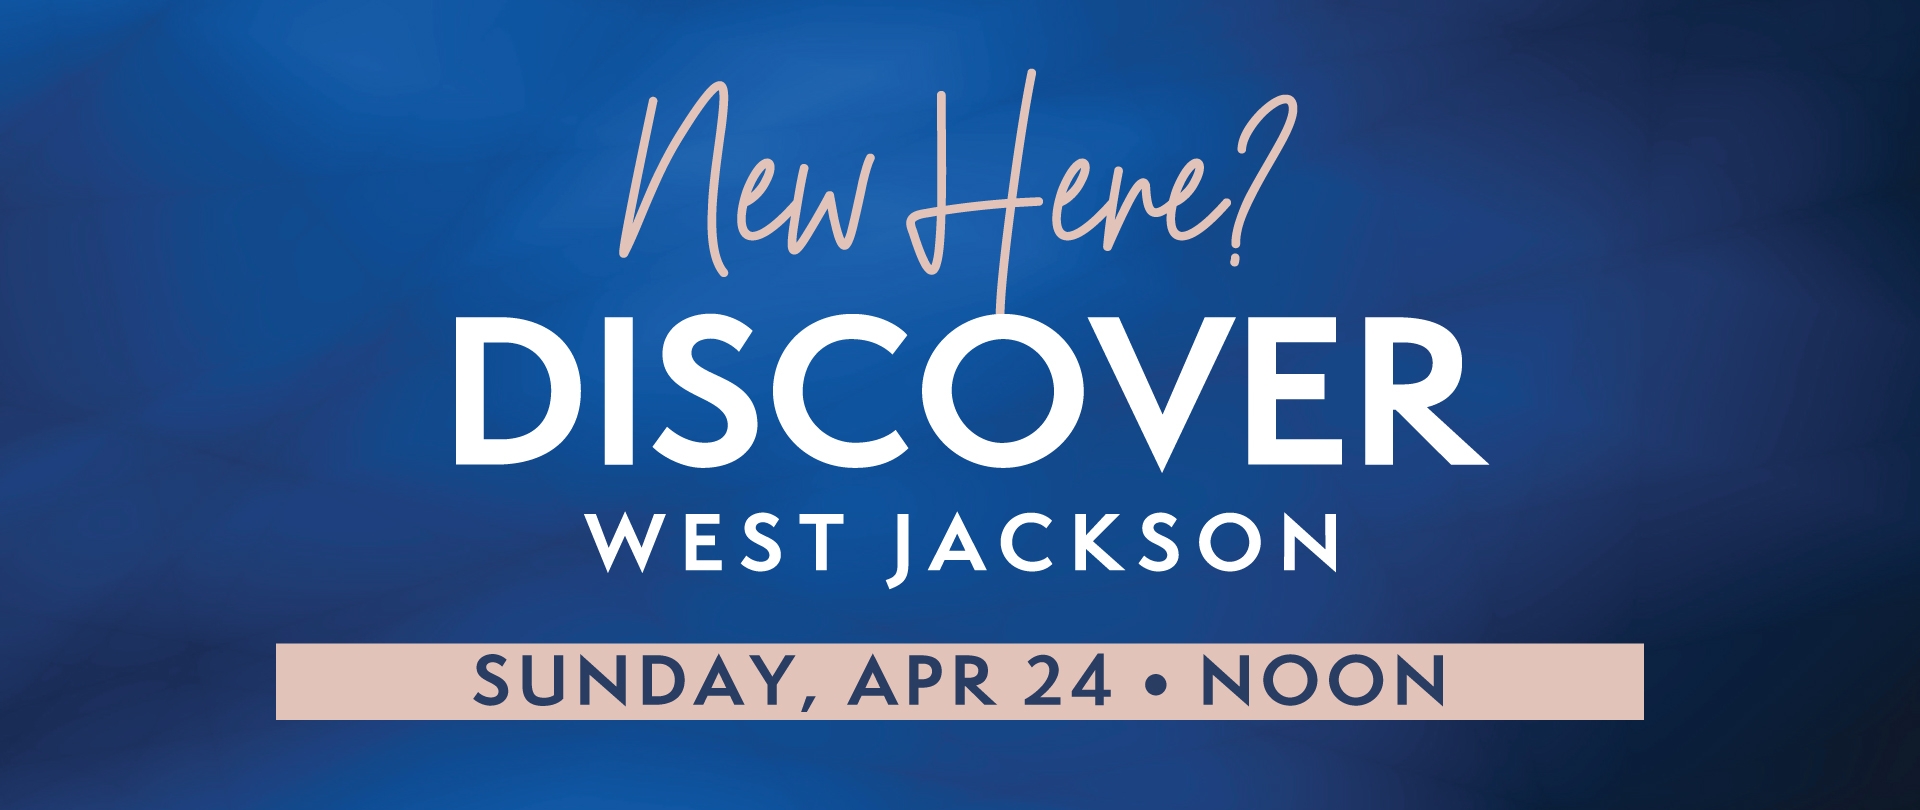 New Here? Discover West Jackson. Sunday, April 24 at Noon.